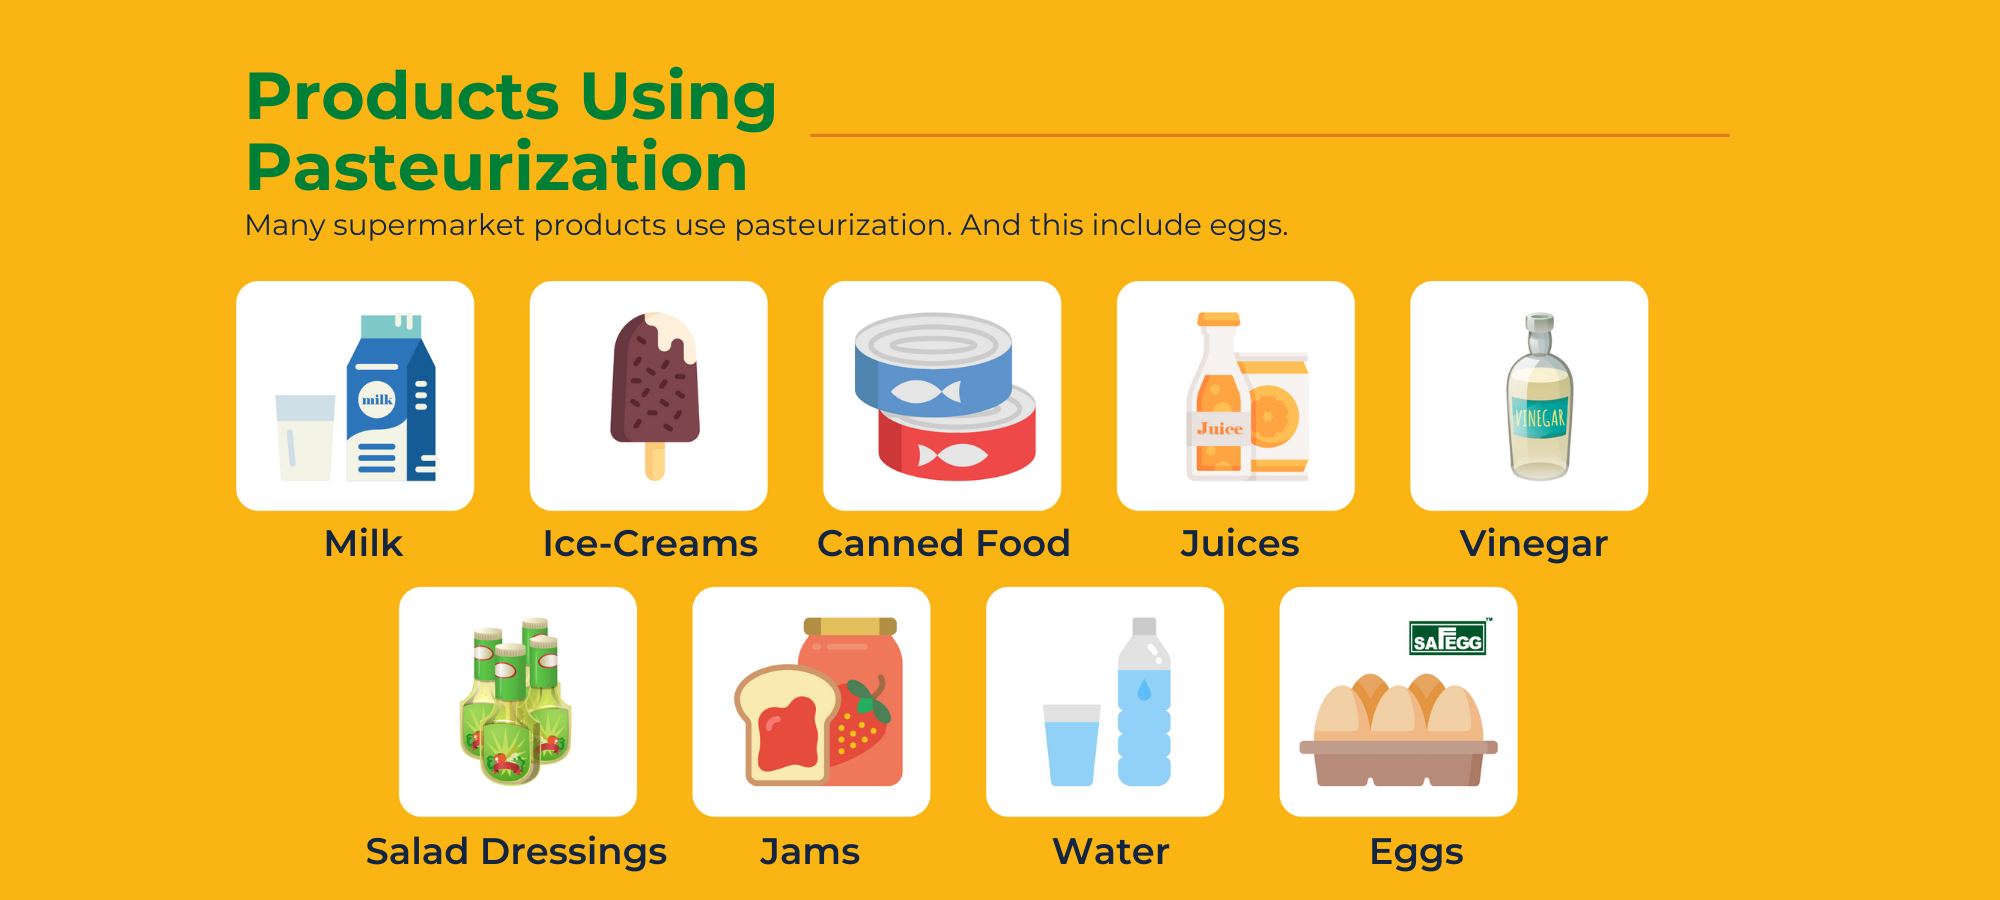 Products_Using_Pasteurization.png